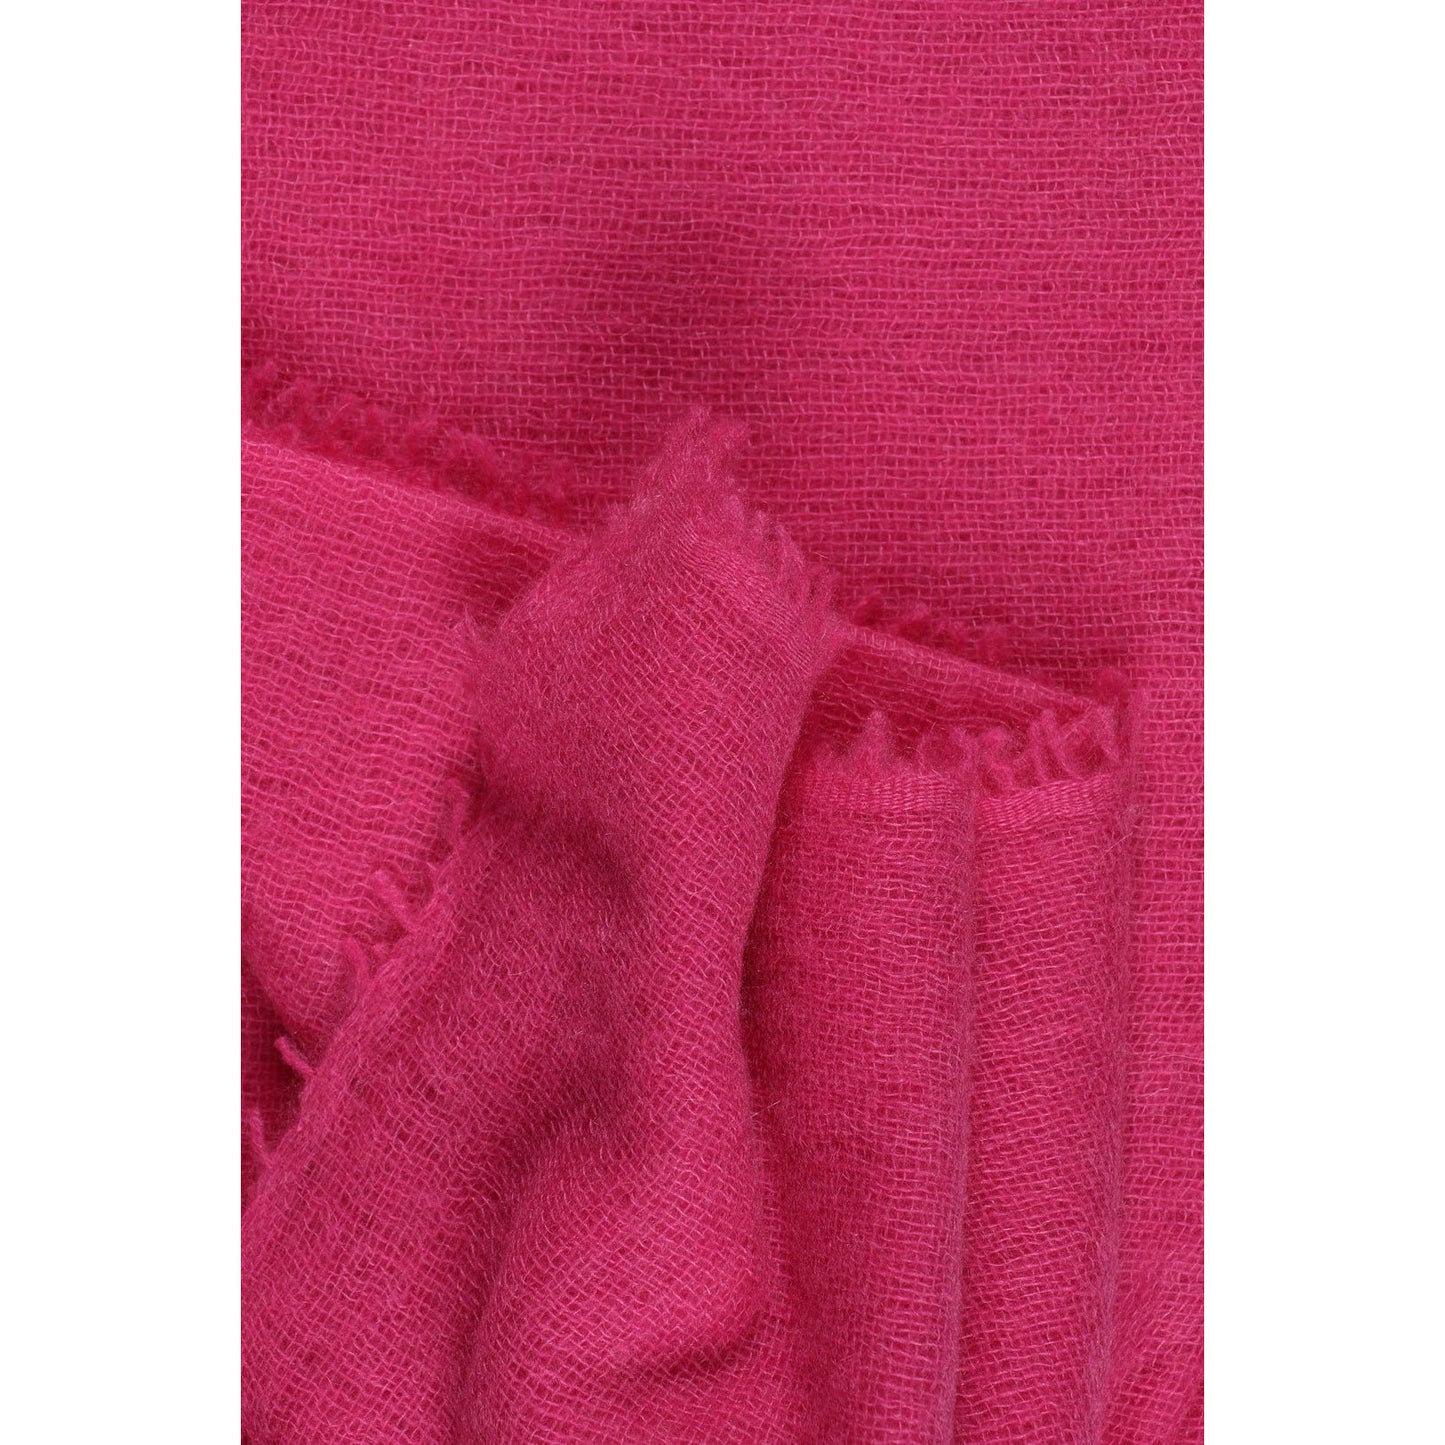 Popping Pink Woven Shawl - Crumpet Chowk